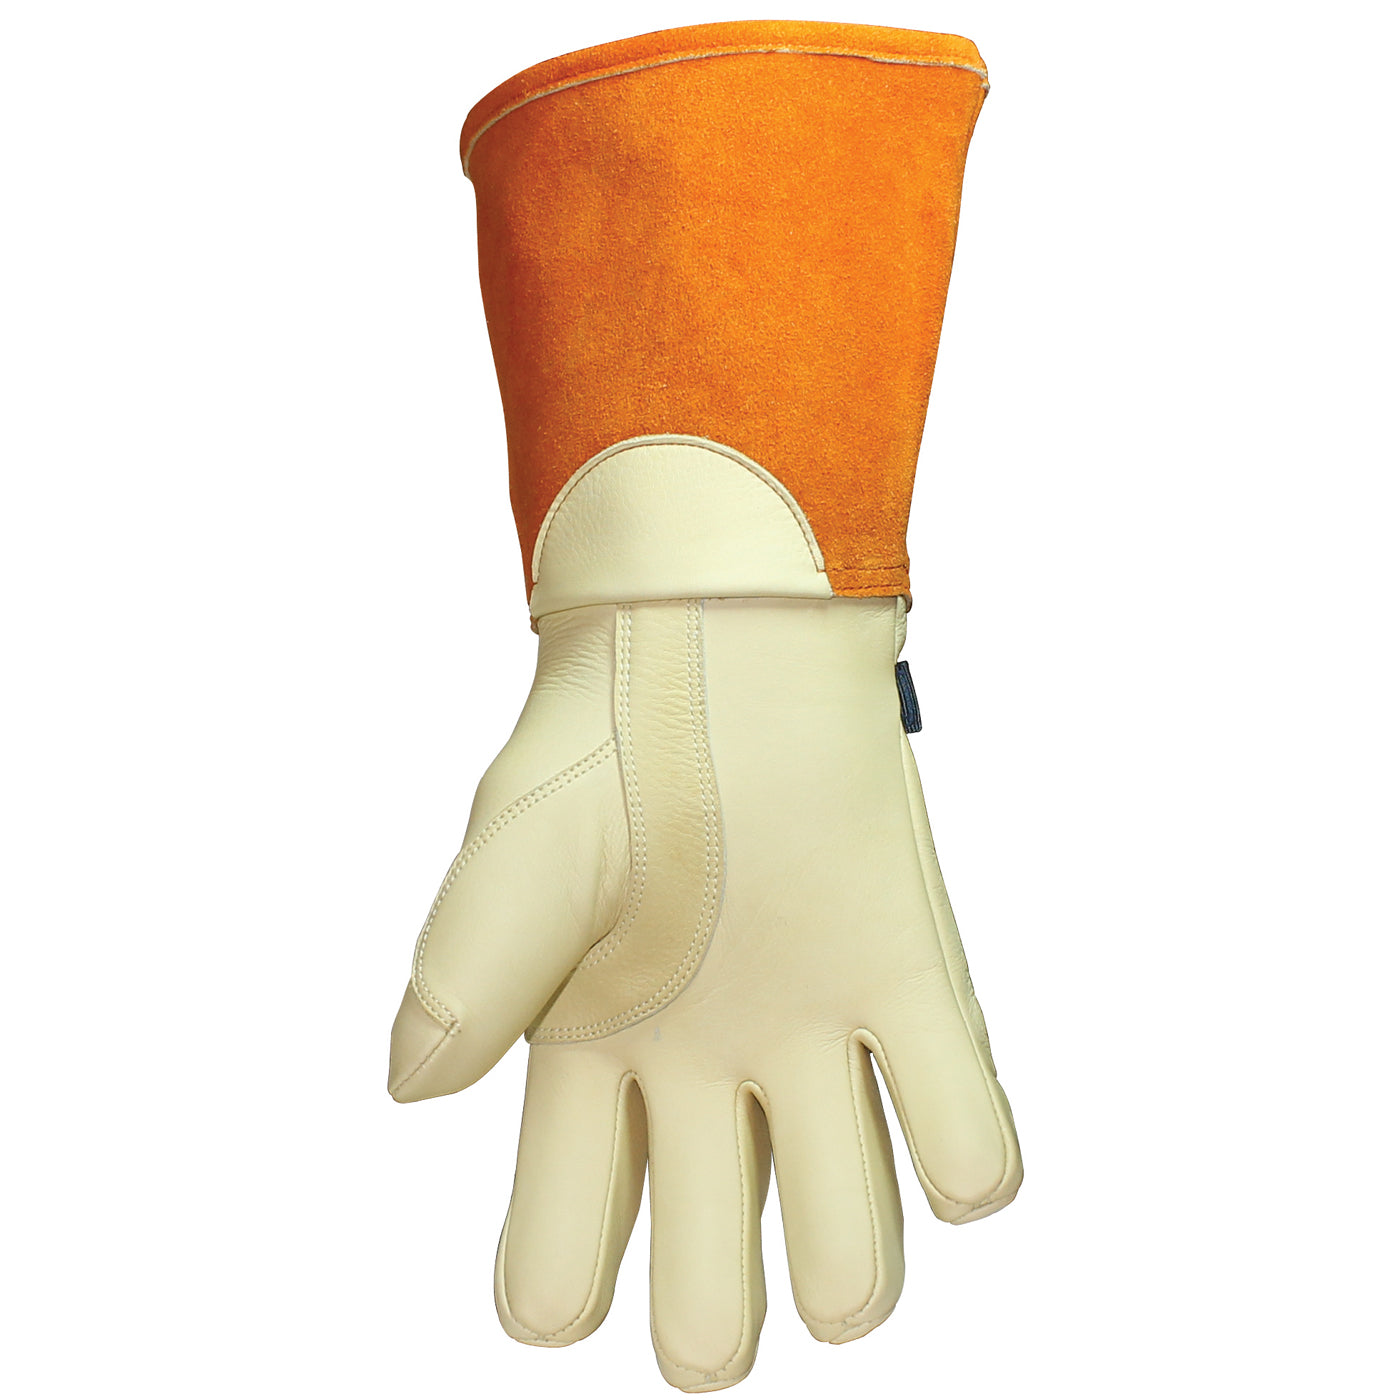 16-5100-15 Youngstown 15" Primary Leather Protector Glove - Main image